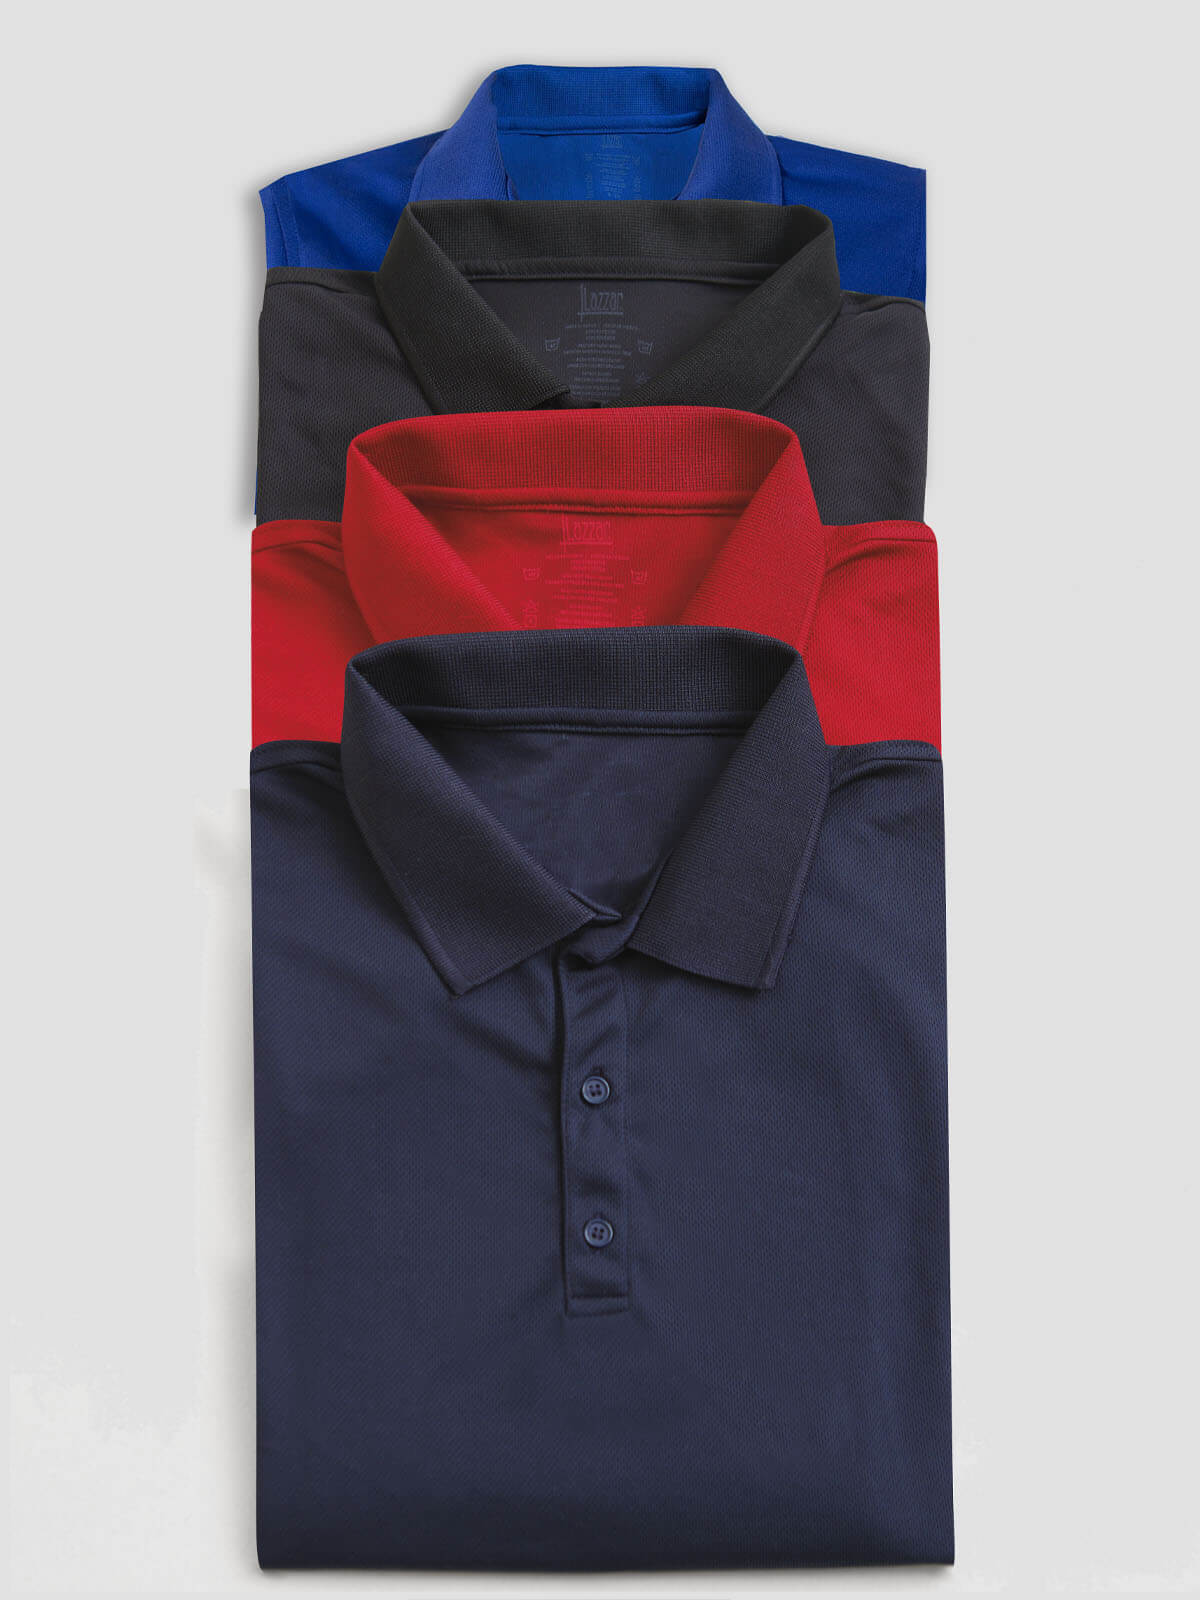 polo dry fit for men